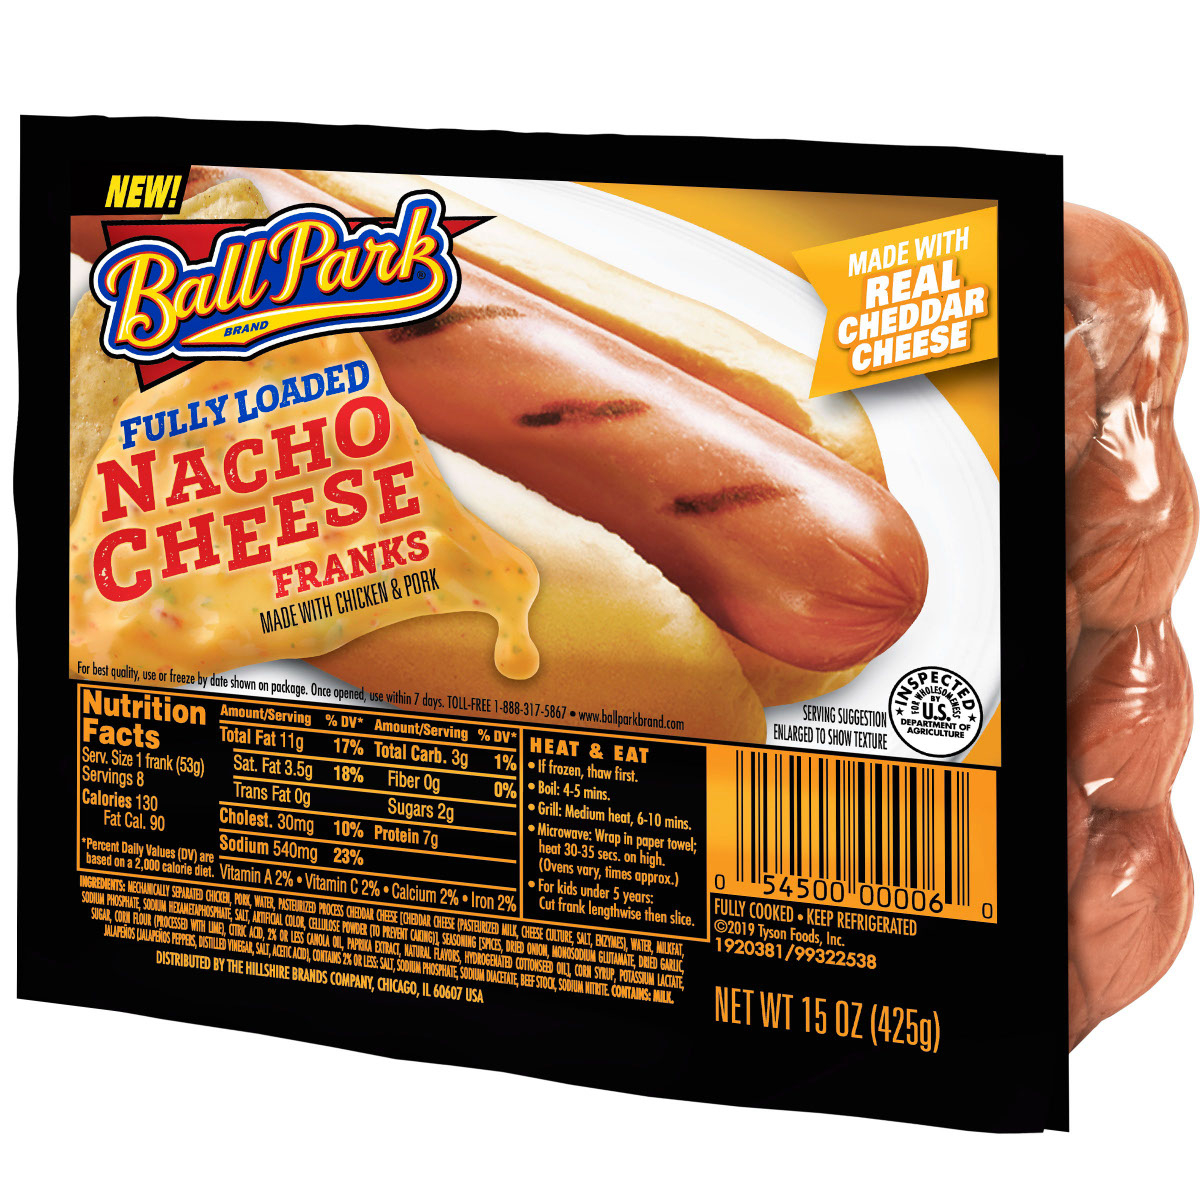 Ball Park Fully Loaded Nacho Cheese Franks provide 7g of protein per serving, with 8 servings per pack. Suggested retail price of $4.99.